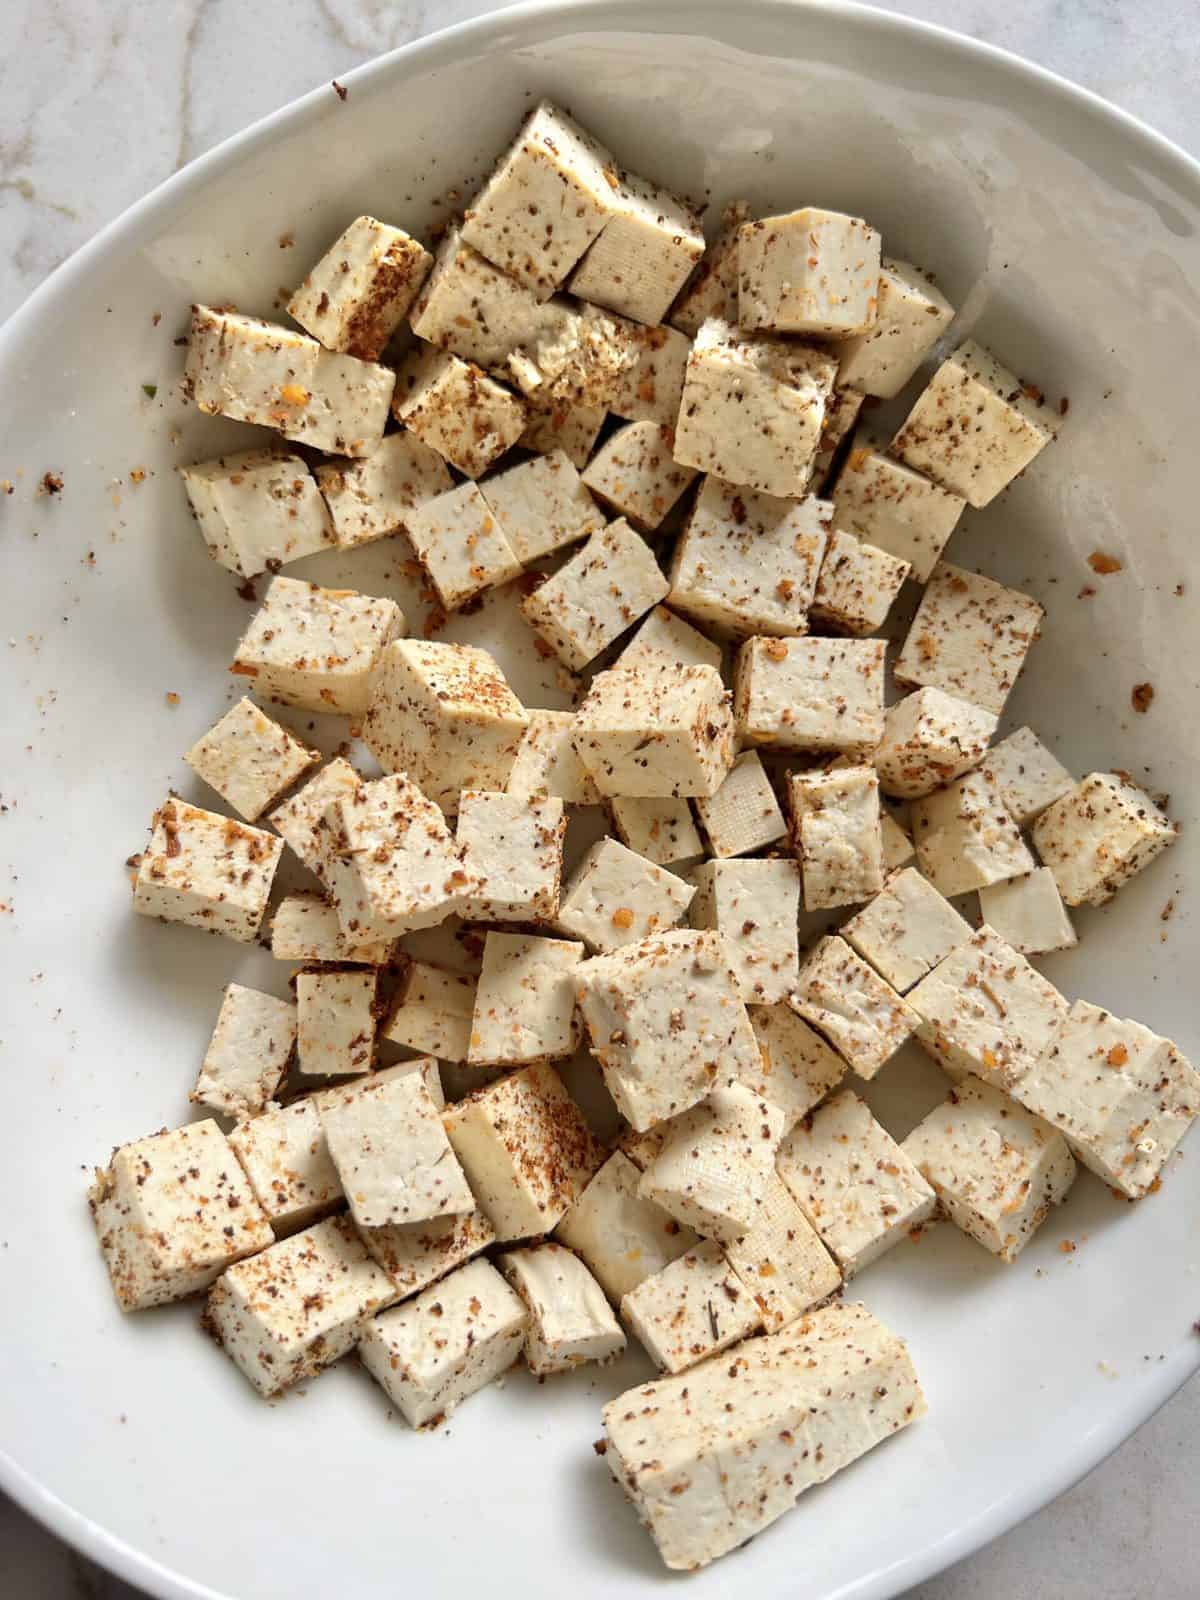 process of mixing ingredients iwth tofu in white bowl